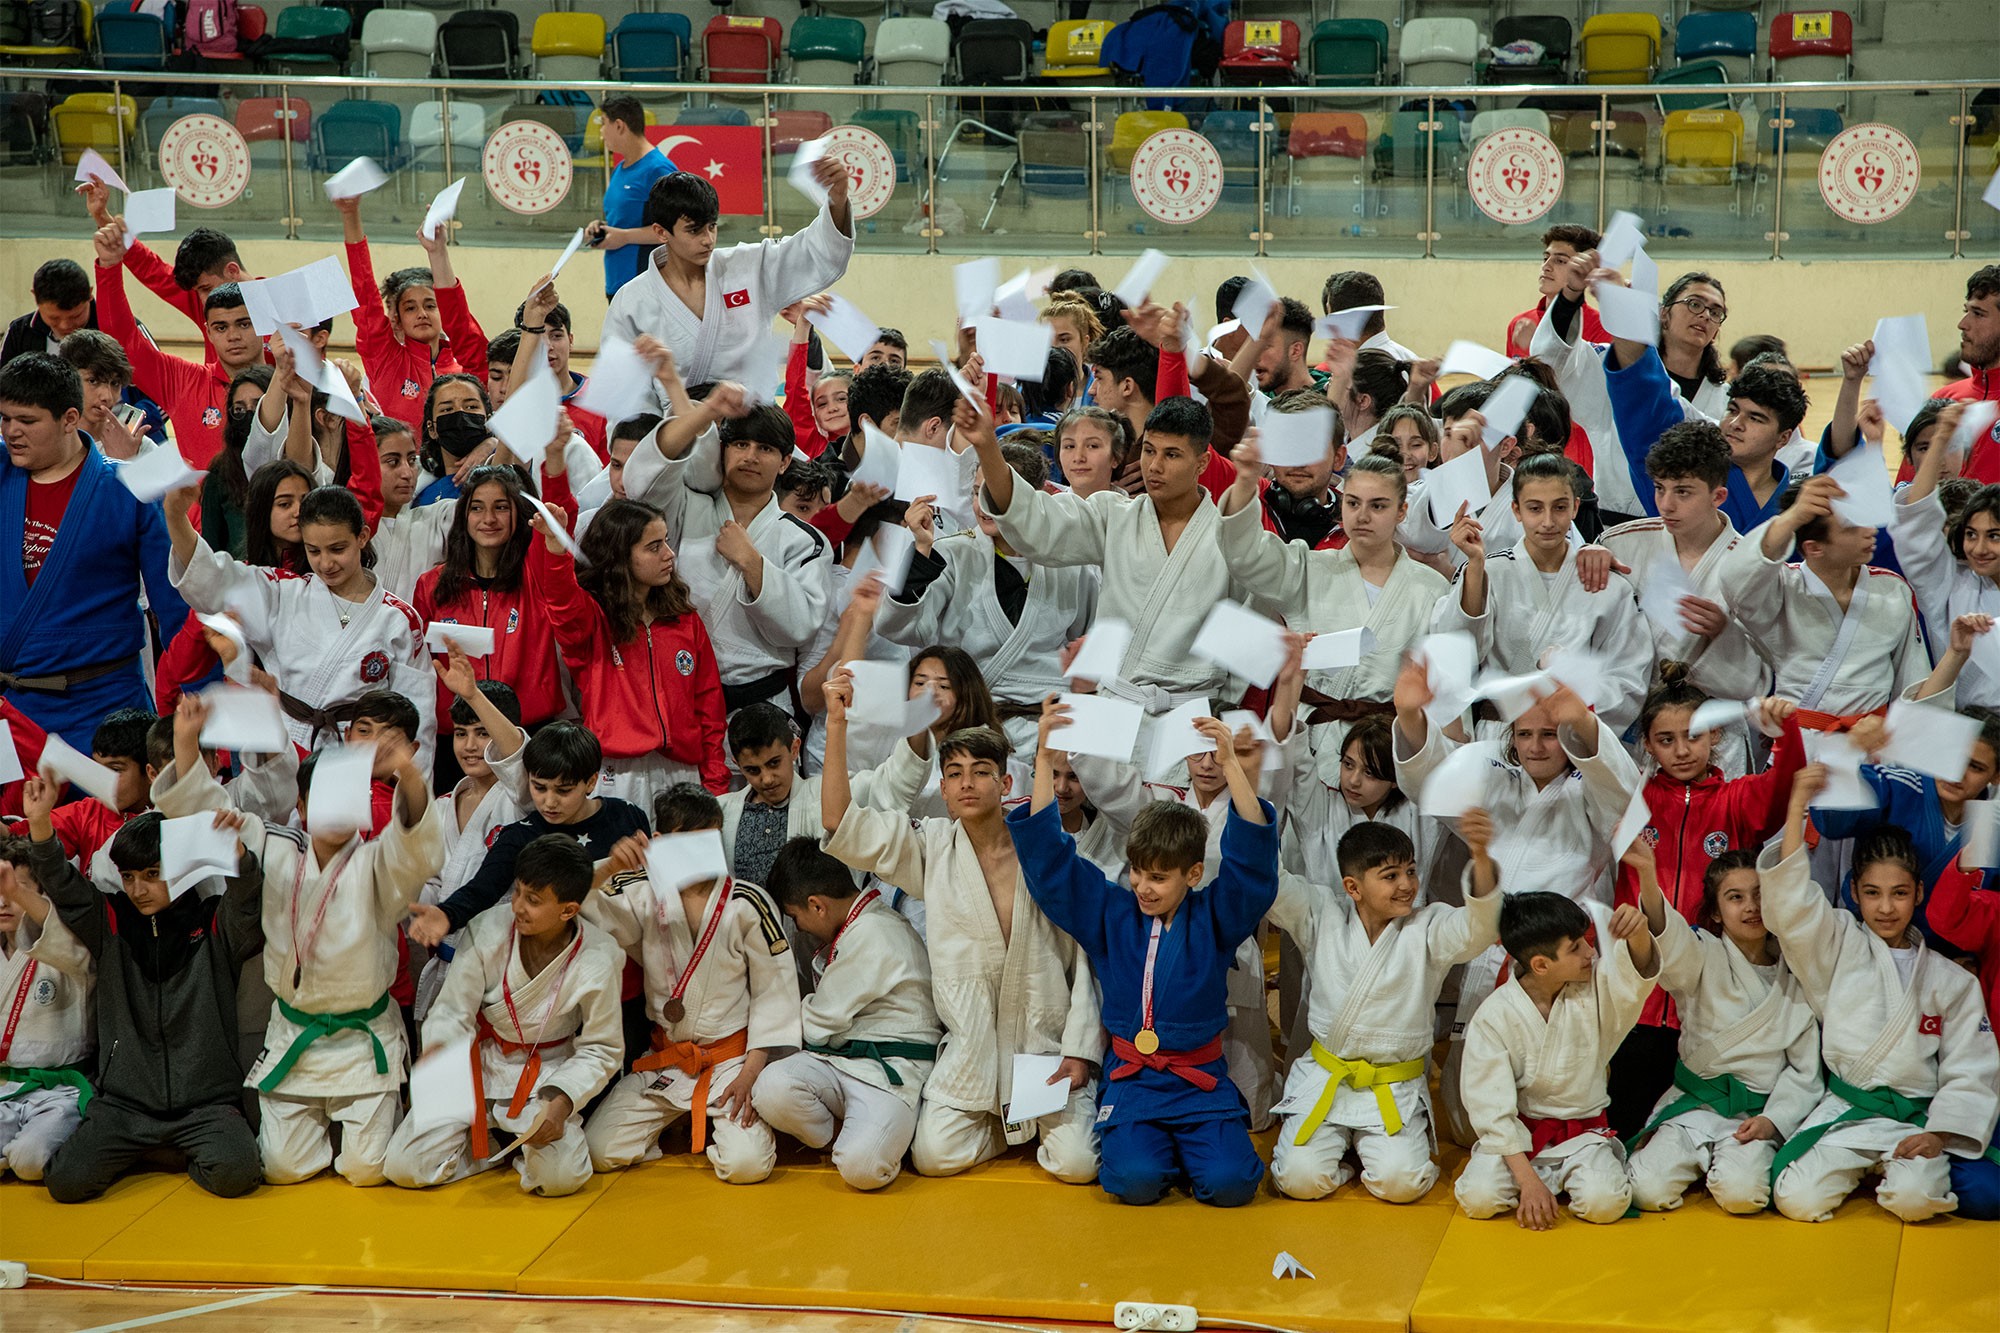 #IDSDP in Kilis: When Peace Really Means Something